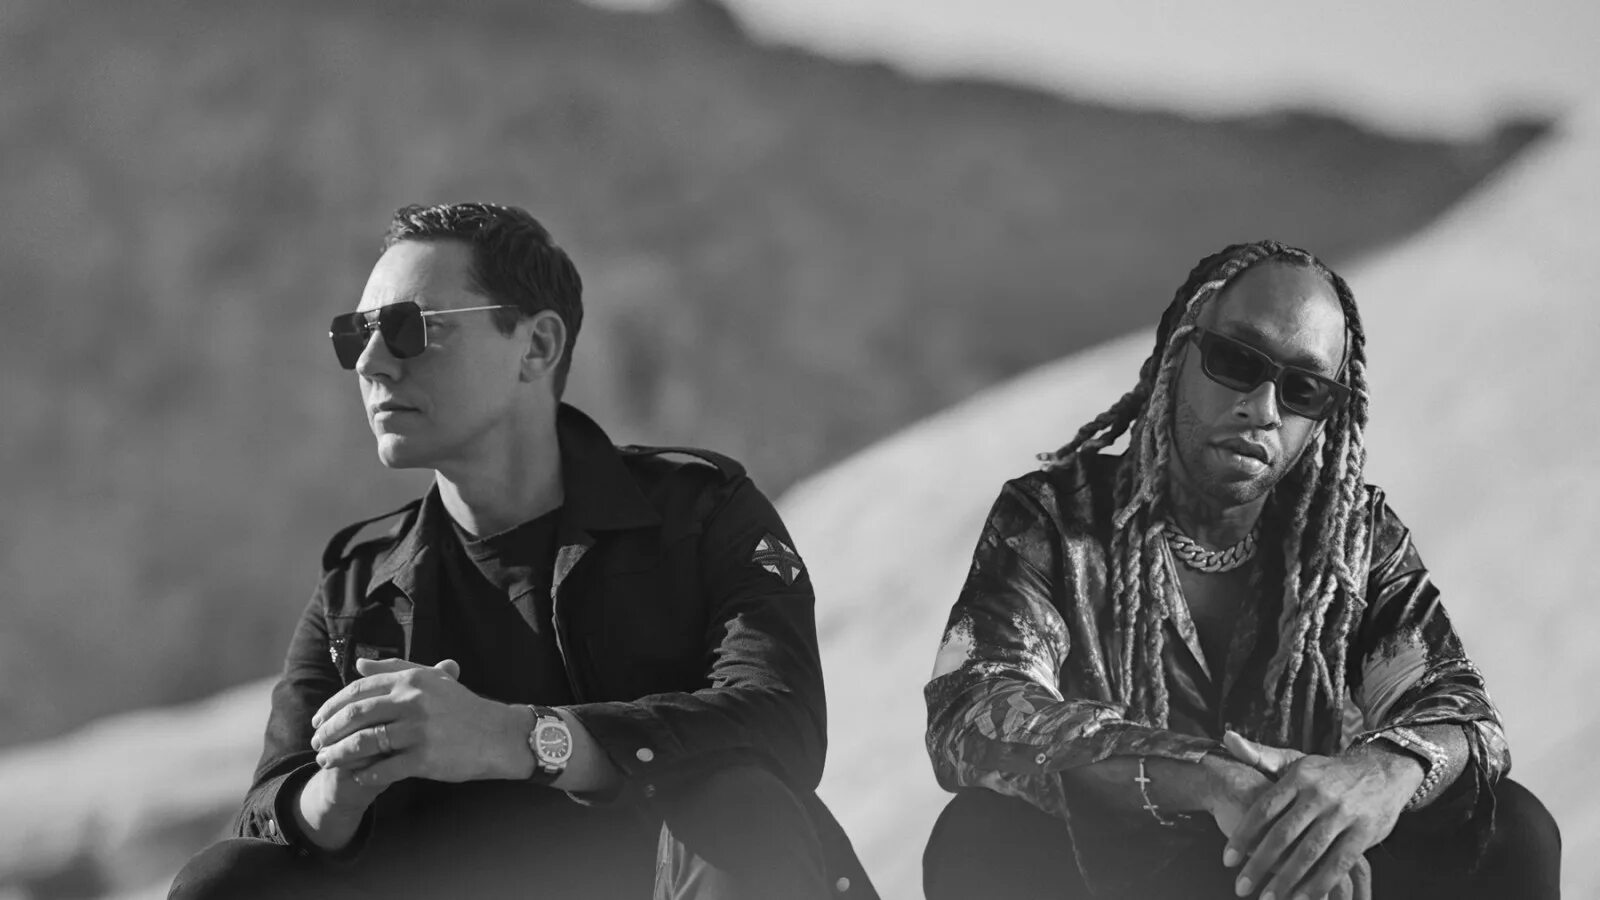 Dolla $IGN. Ty Dolla $IGN. Tiësto & ty Dolla $IGN - the Business, pt. II. Tiësto - the Business.